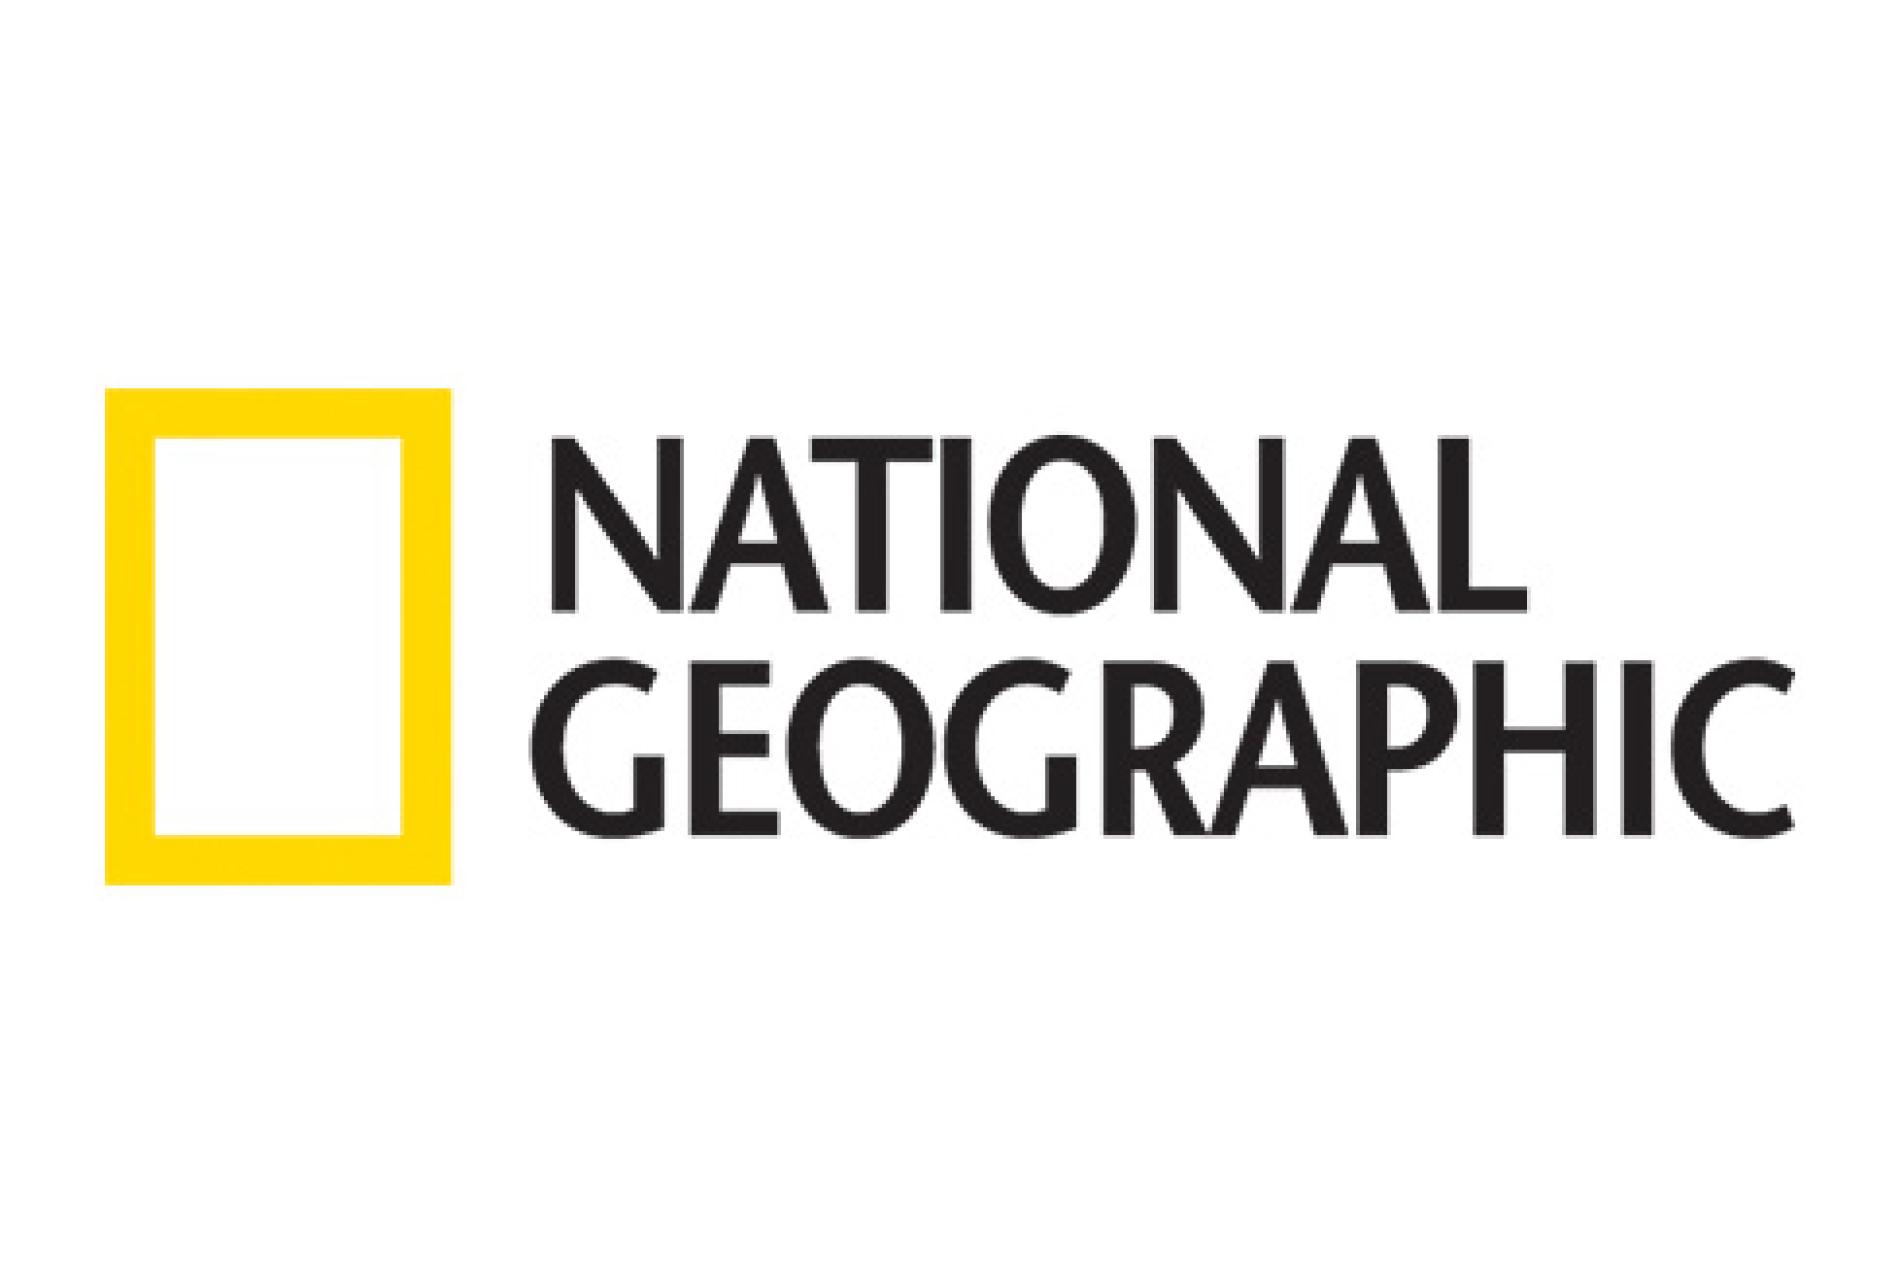 Image result for national geographic logo